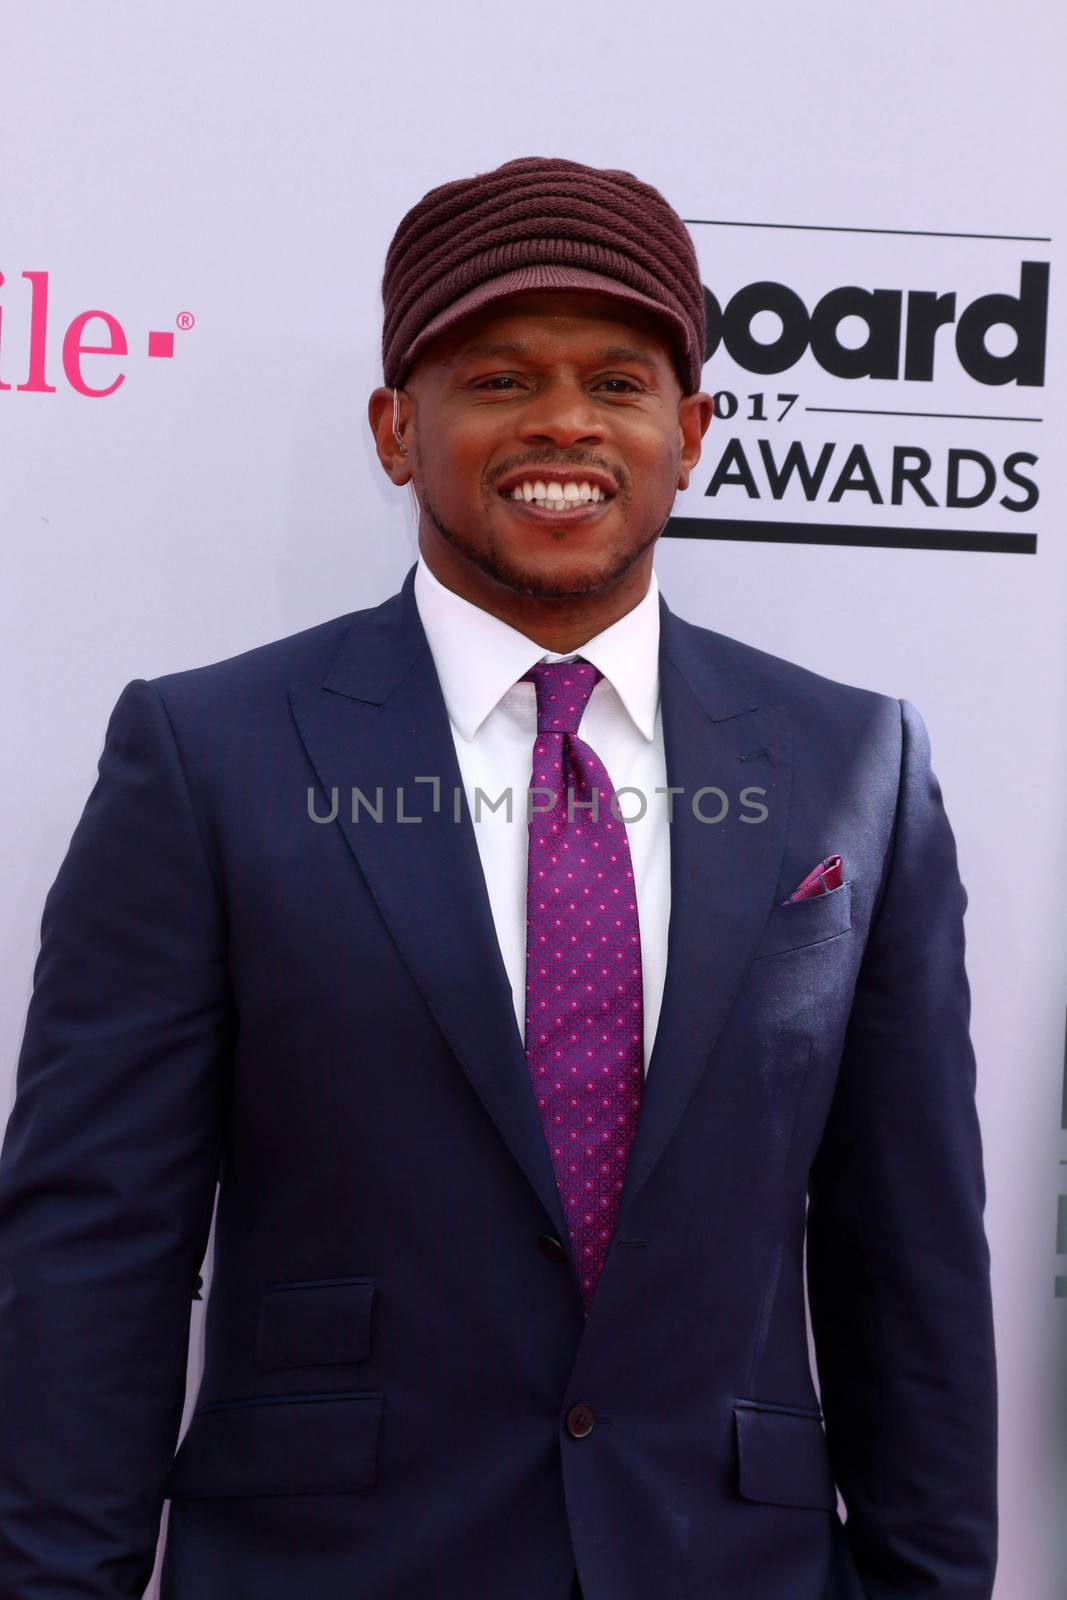 Sway Calloway
at the 2017 Billboard Awards Arrivals, T-Mobile Arena, Las Vegas, NV 05-21-17/ImageCollect by ImageCollect